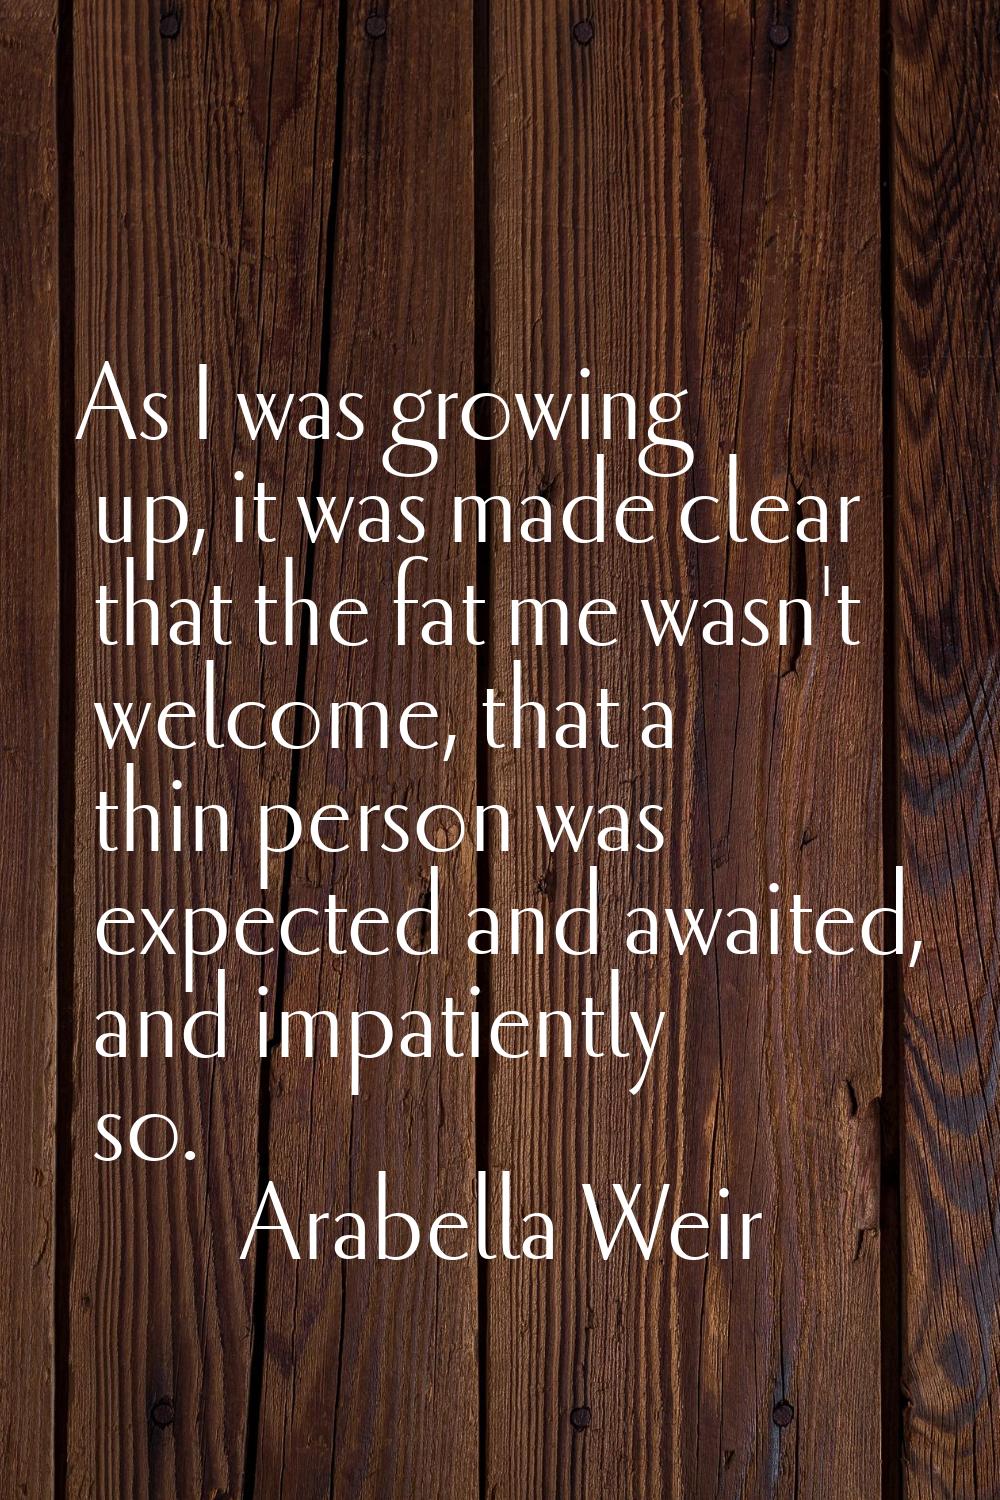 As I was growing up, it was made clear that the fat me wasn't welcome, that a thin person was expec